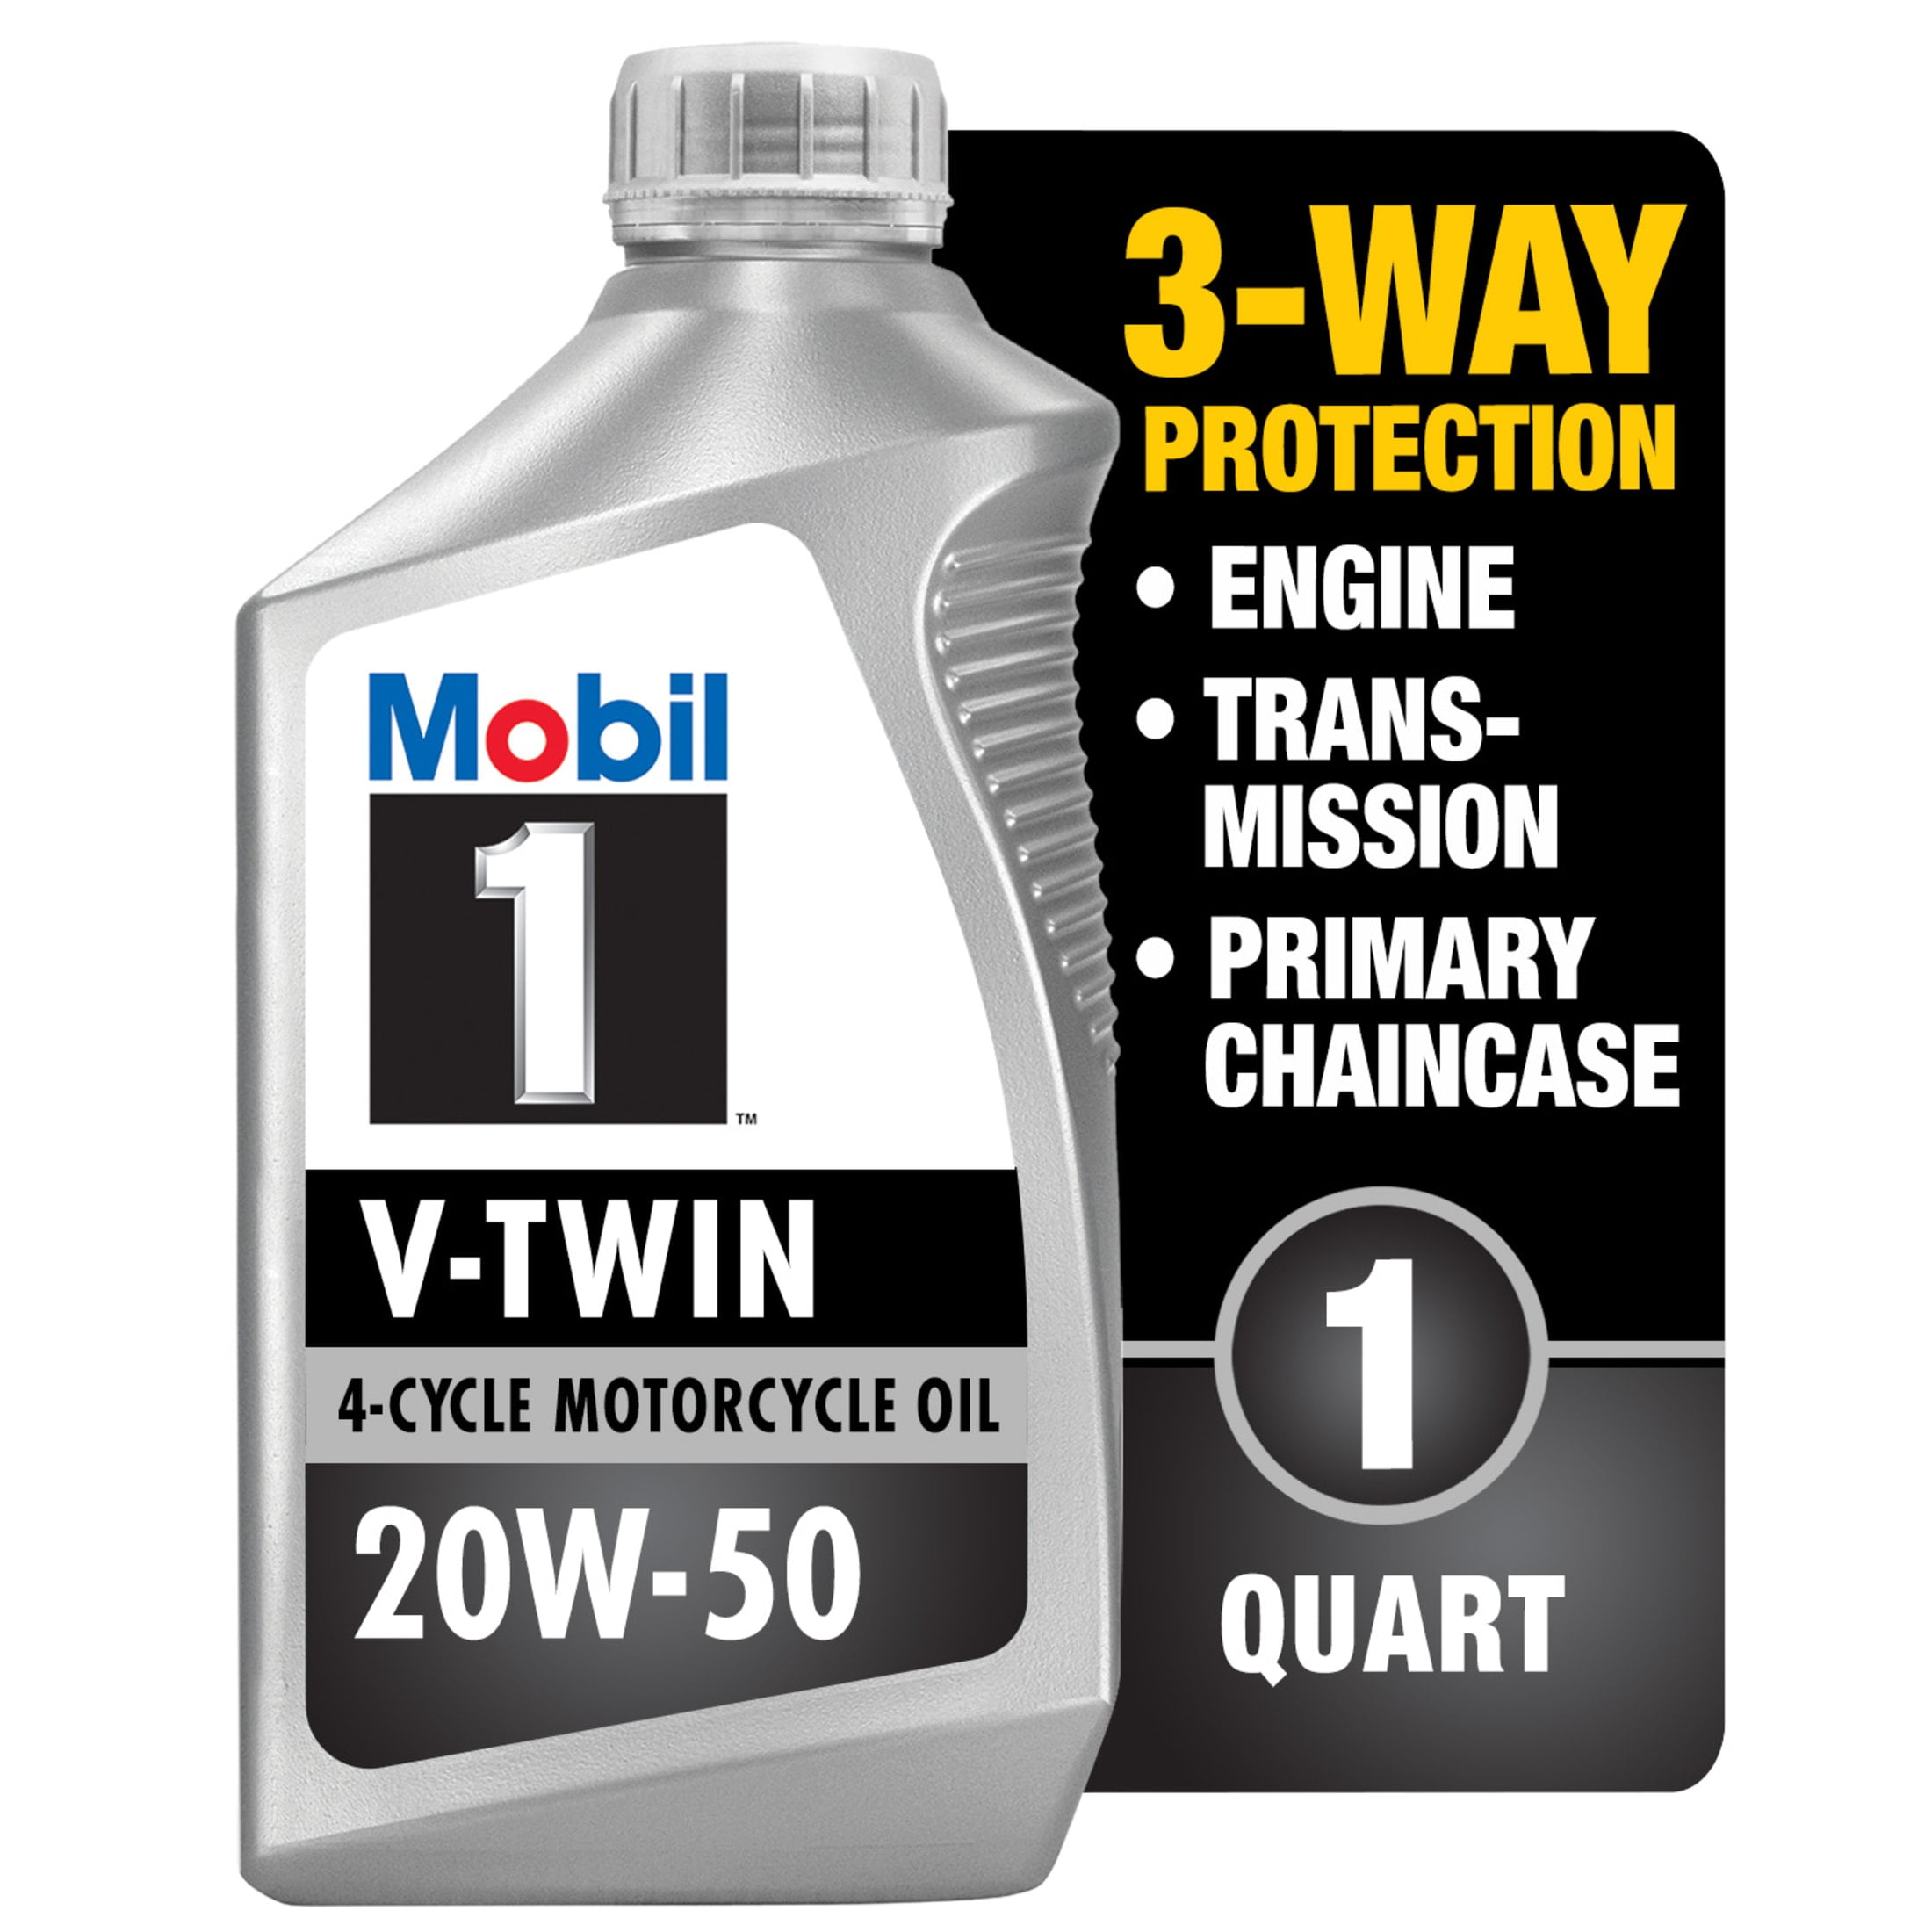 Mobil 1 V-Twin Full Synthetic Motorcycle Oil 20W-50, 1 Quart 